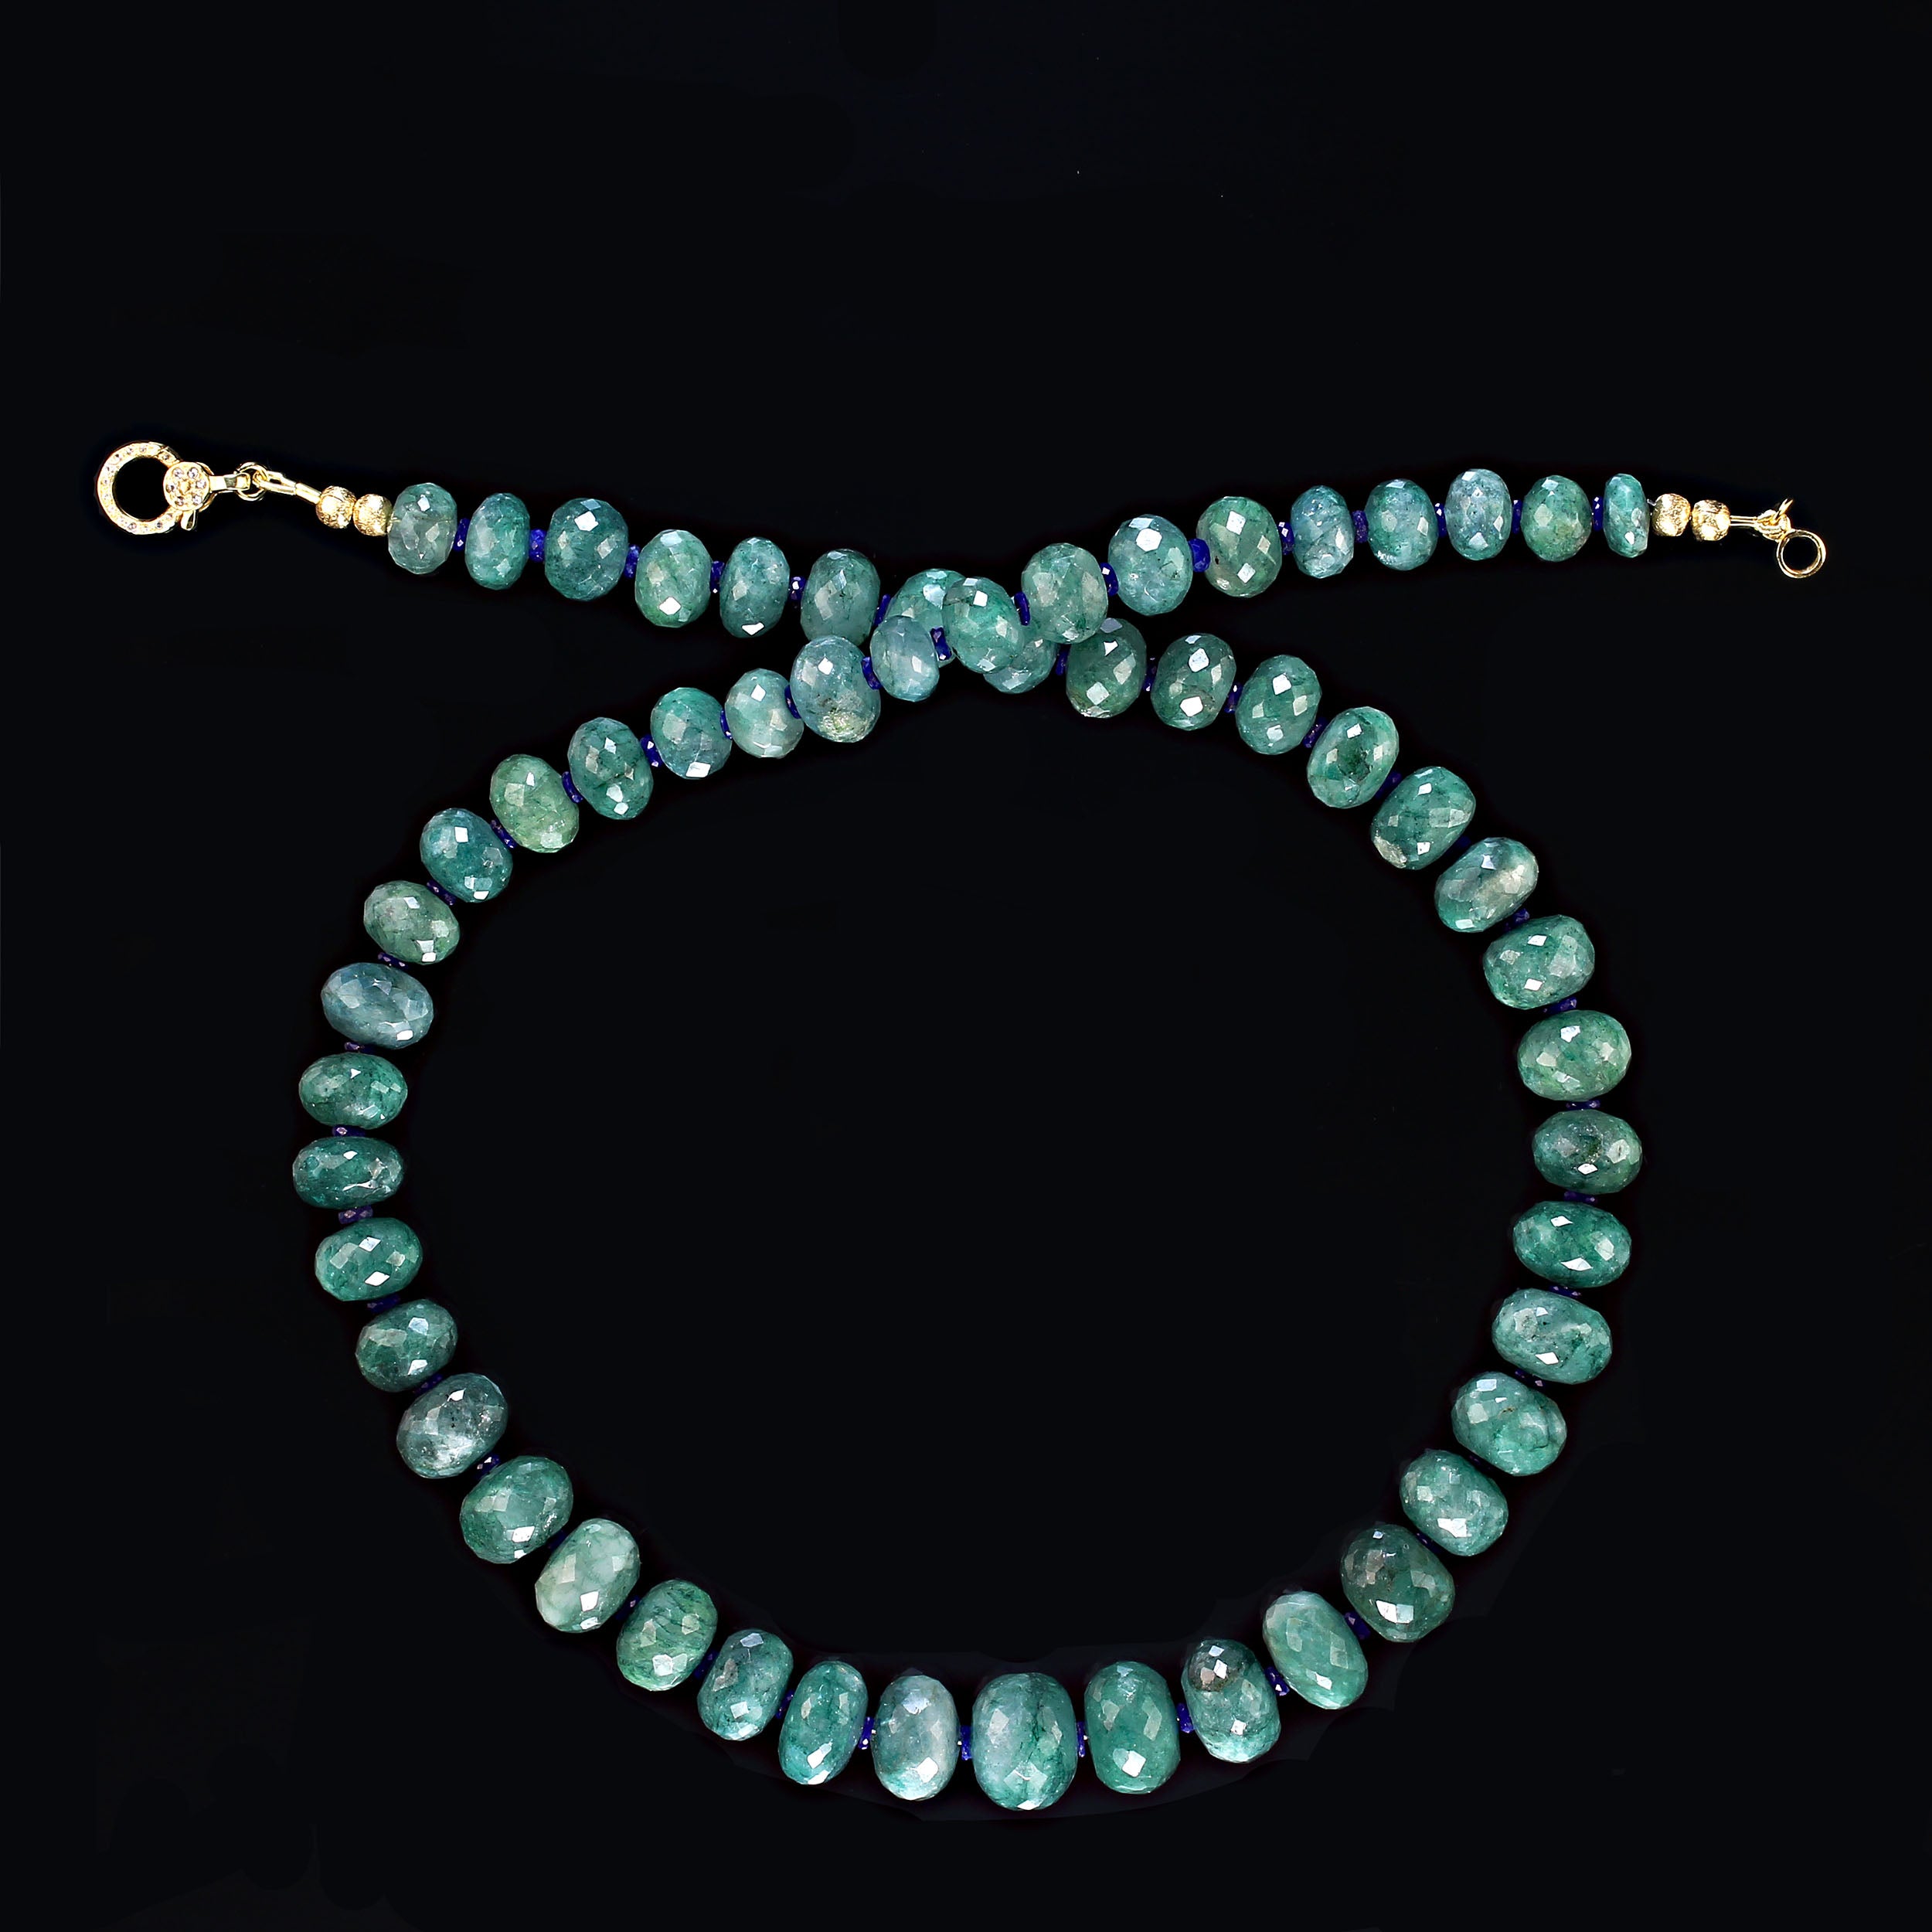 21 Inch sparkling green Green Beryl/Emerald necklace. Green enhances everything and this necklace proves that point.  The facets sparkle and pop as the necklace moves.  The rounded rondelles graduate 8-13MM and are accented with sparkling 3MM blue